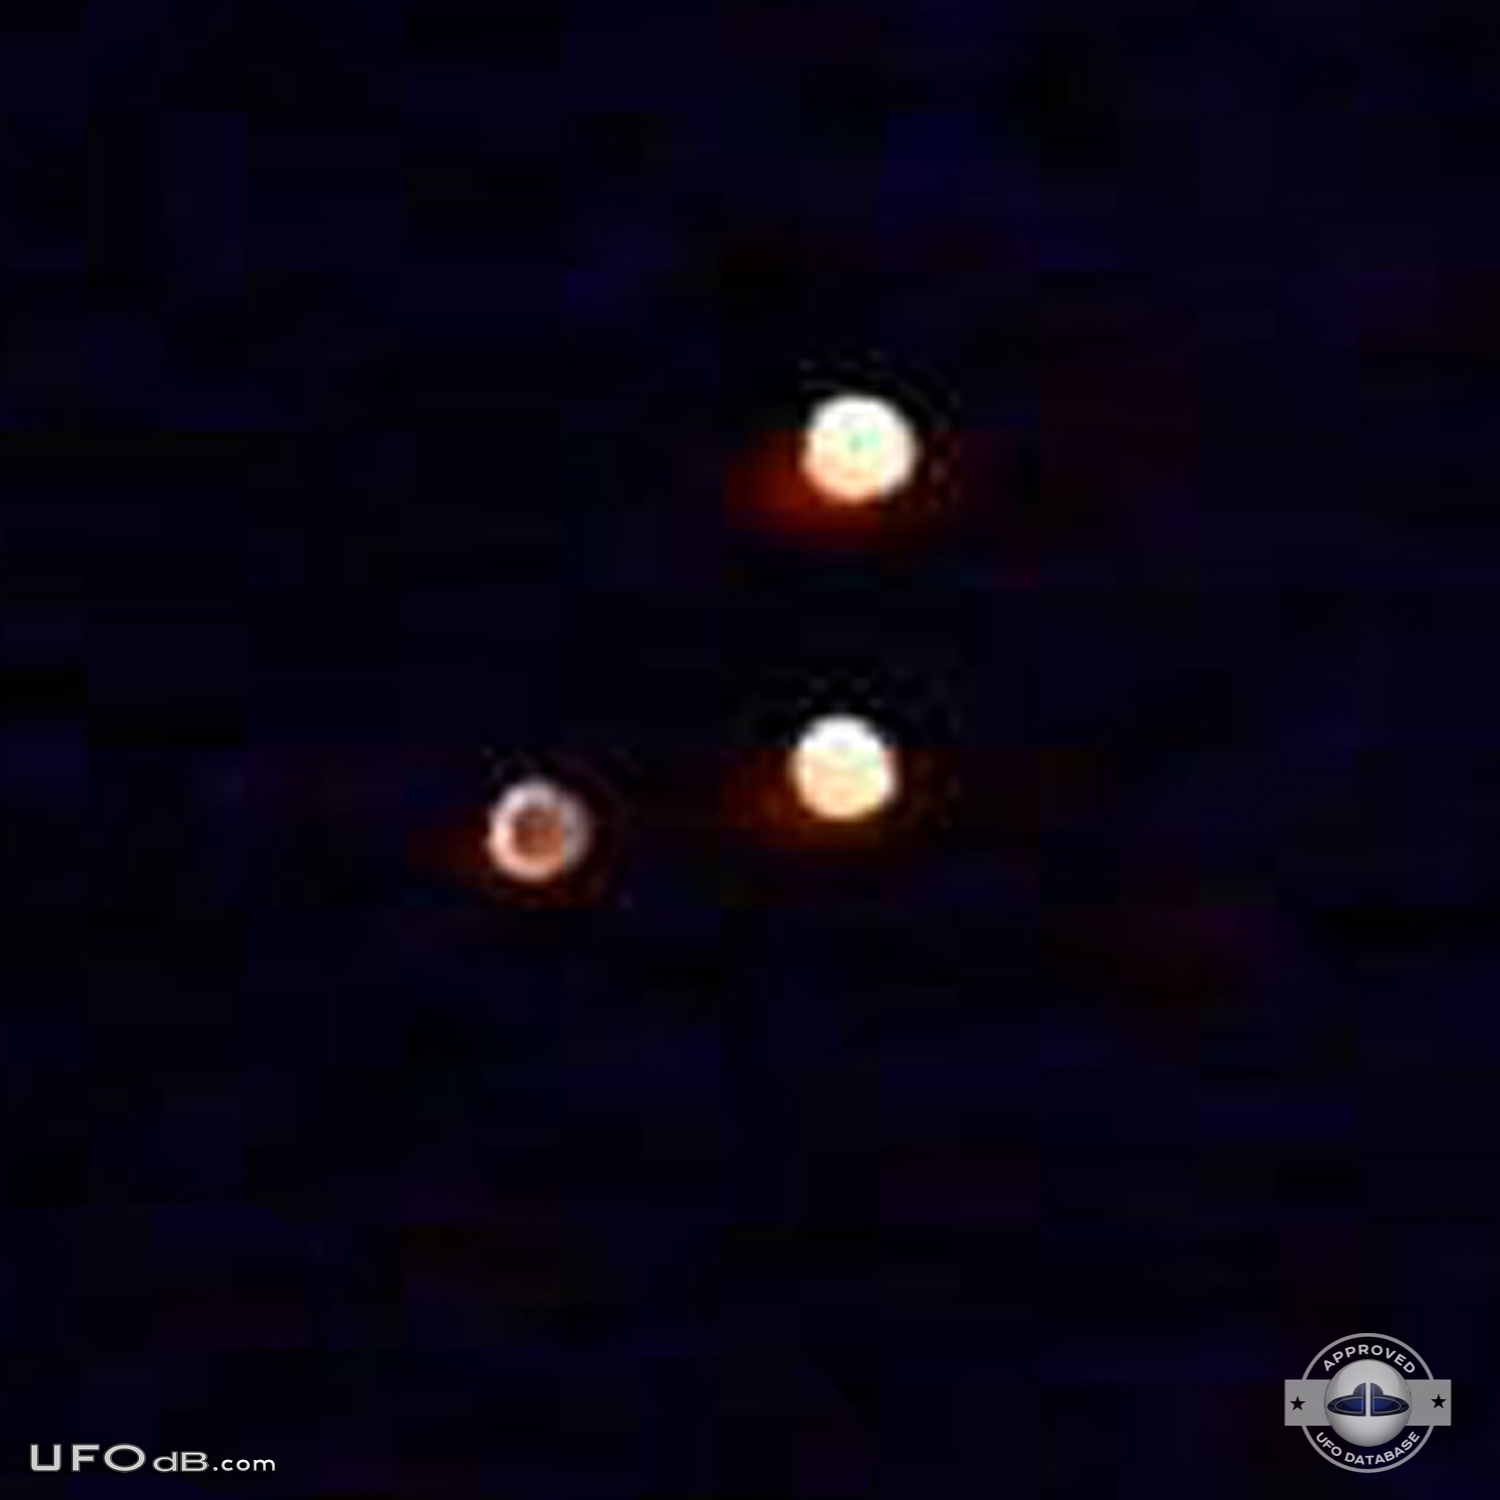 Strange trio of spherical UFOs caught on photo over Israel - 1992 UFO Picture #402-2